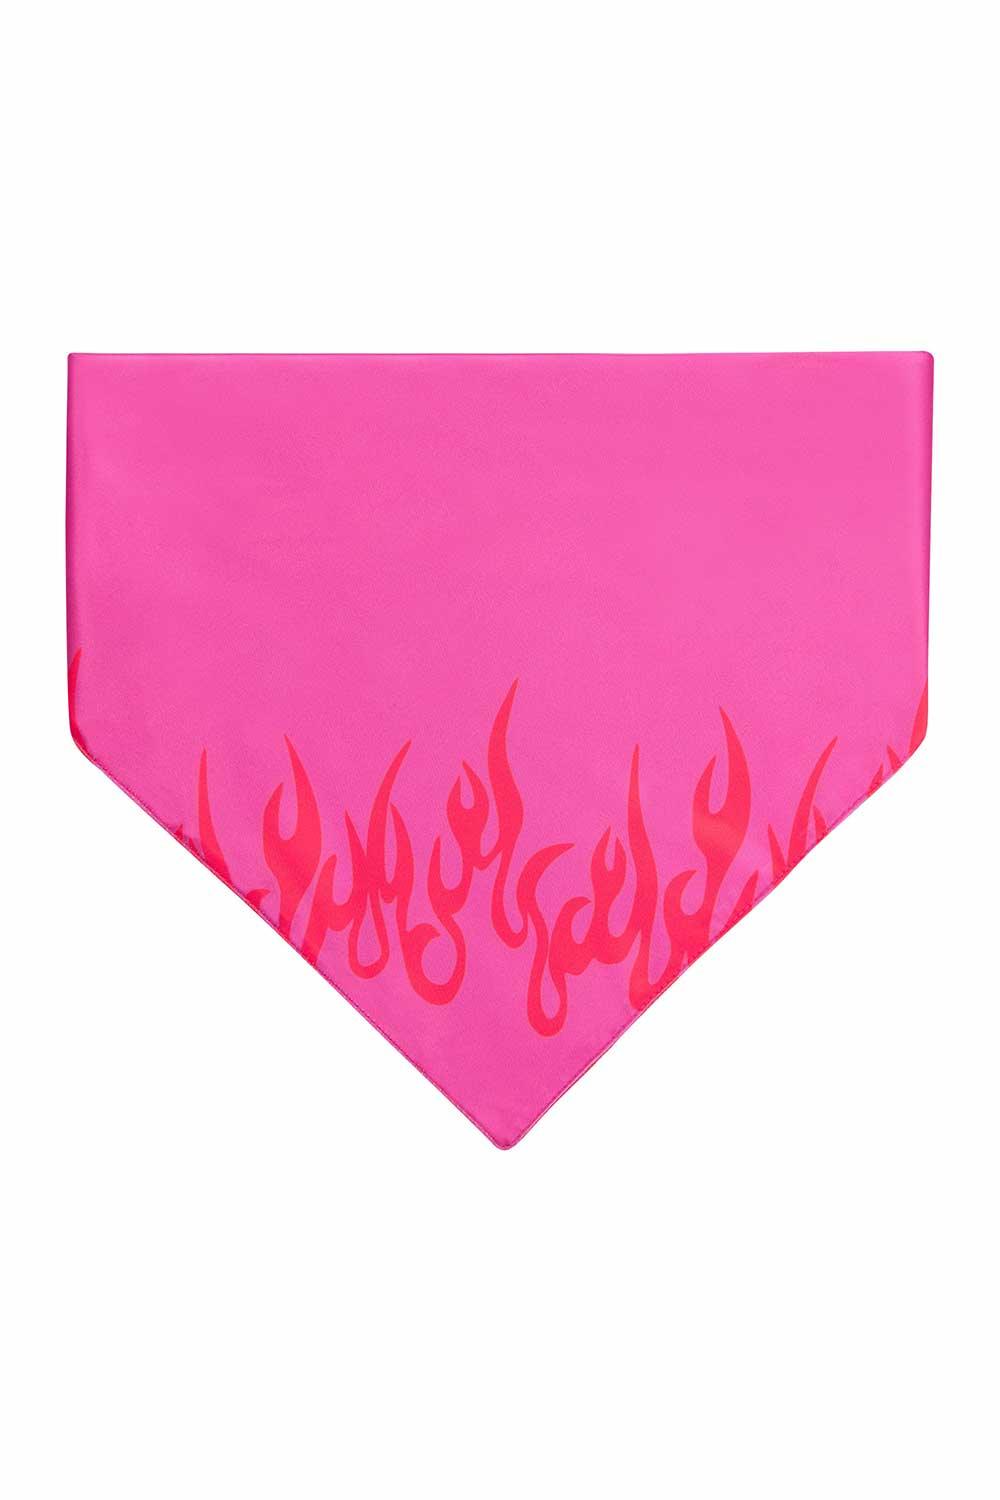 Little Monsters | LM Fire Bandana 2 | Milagron